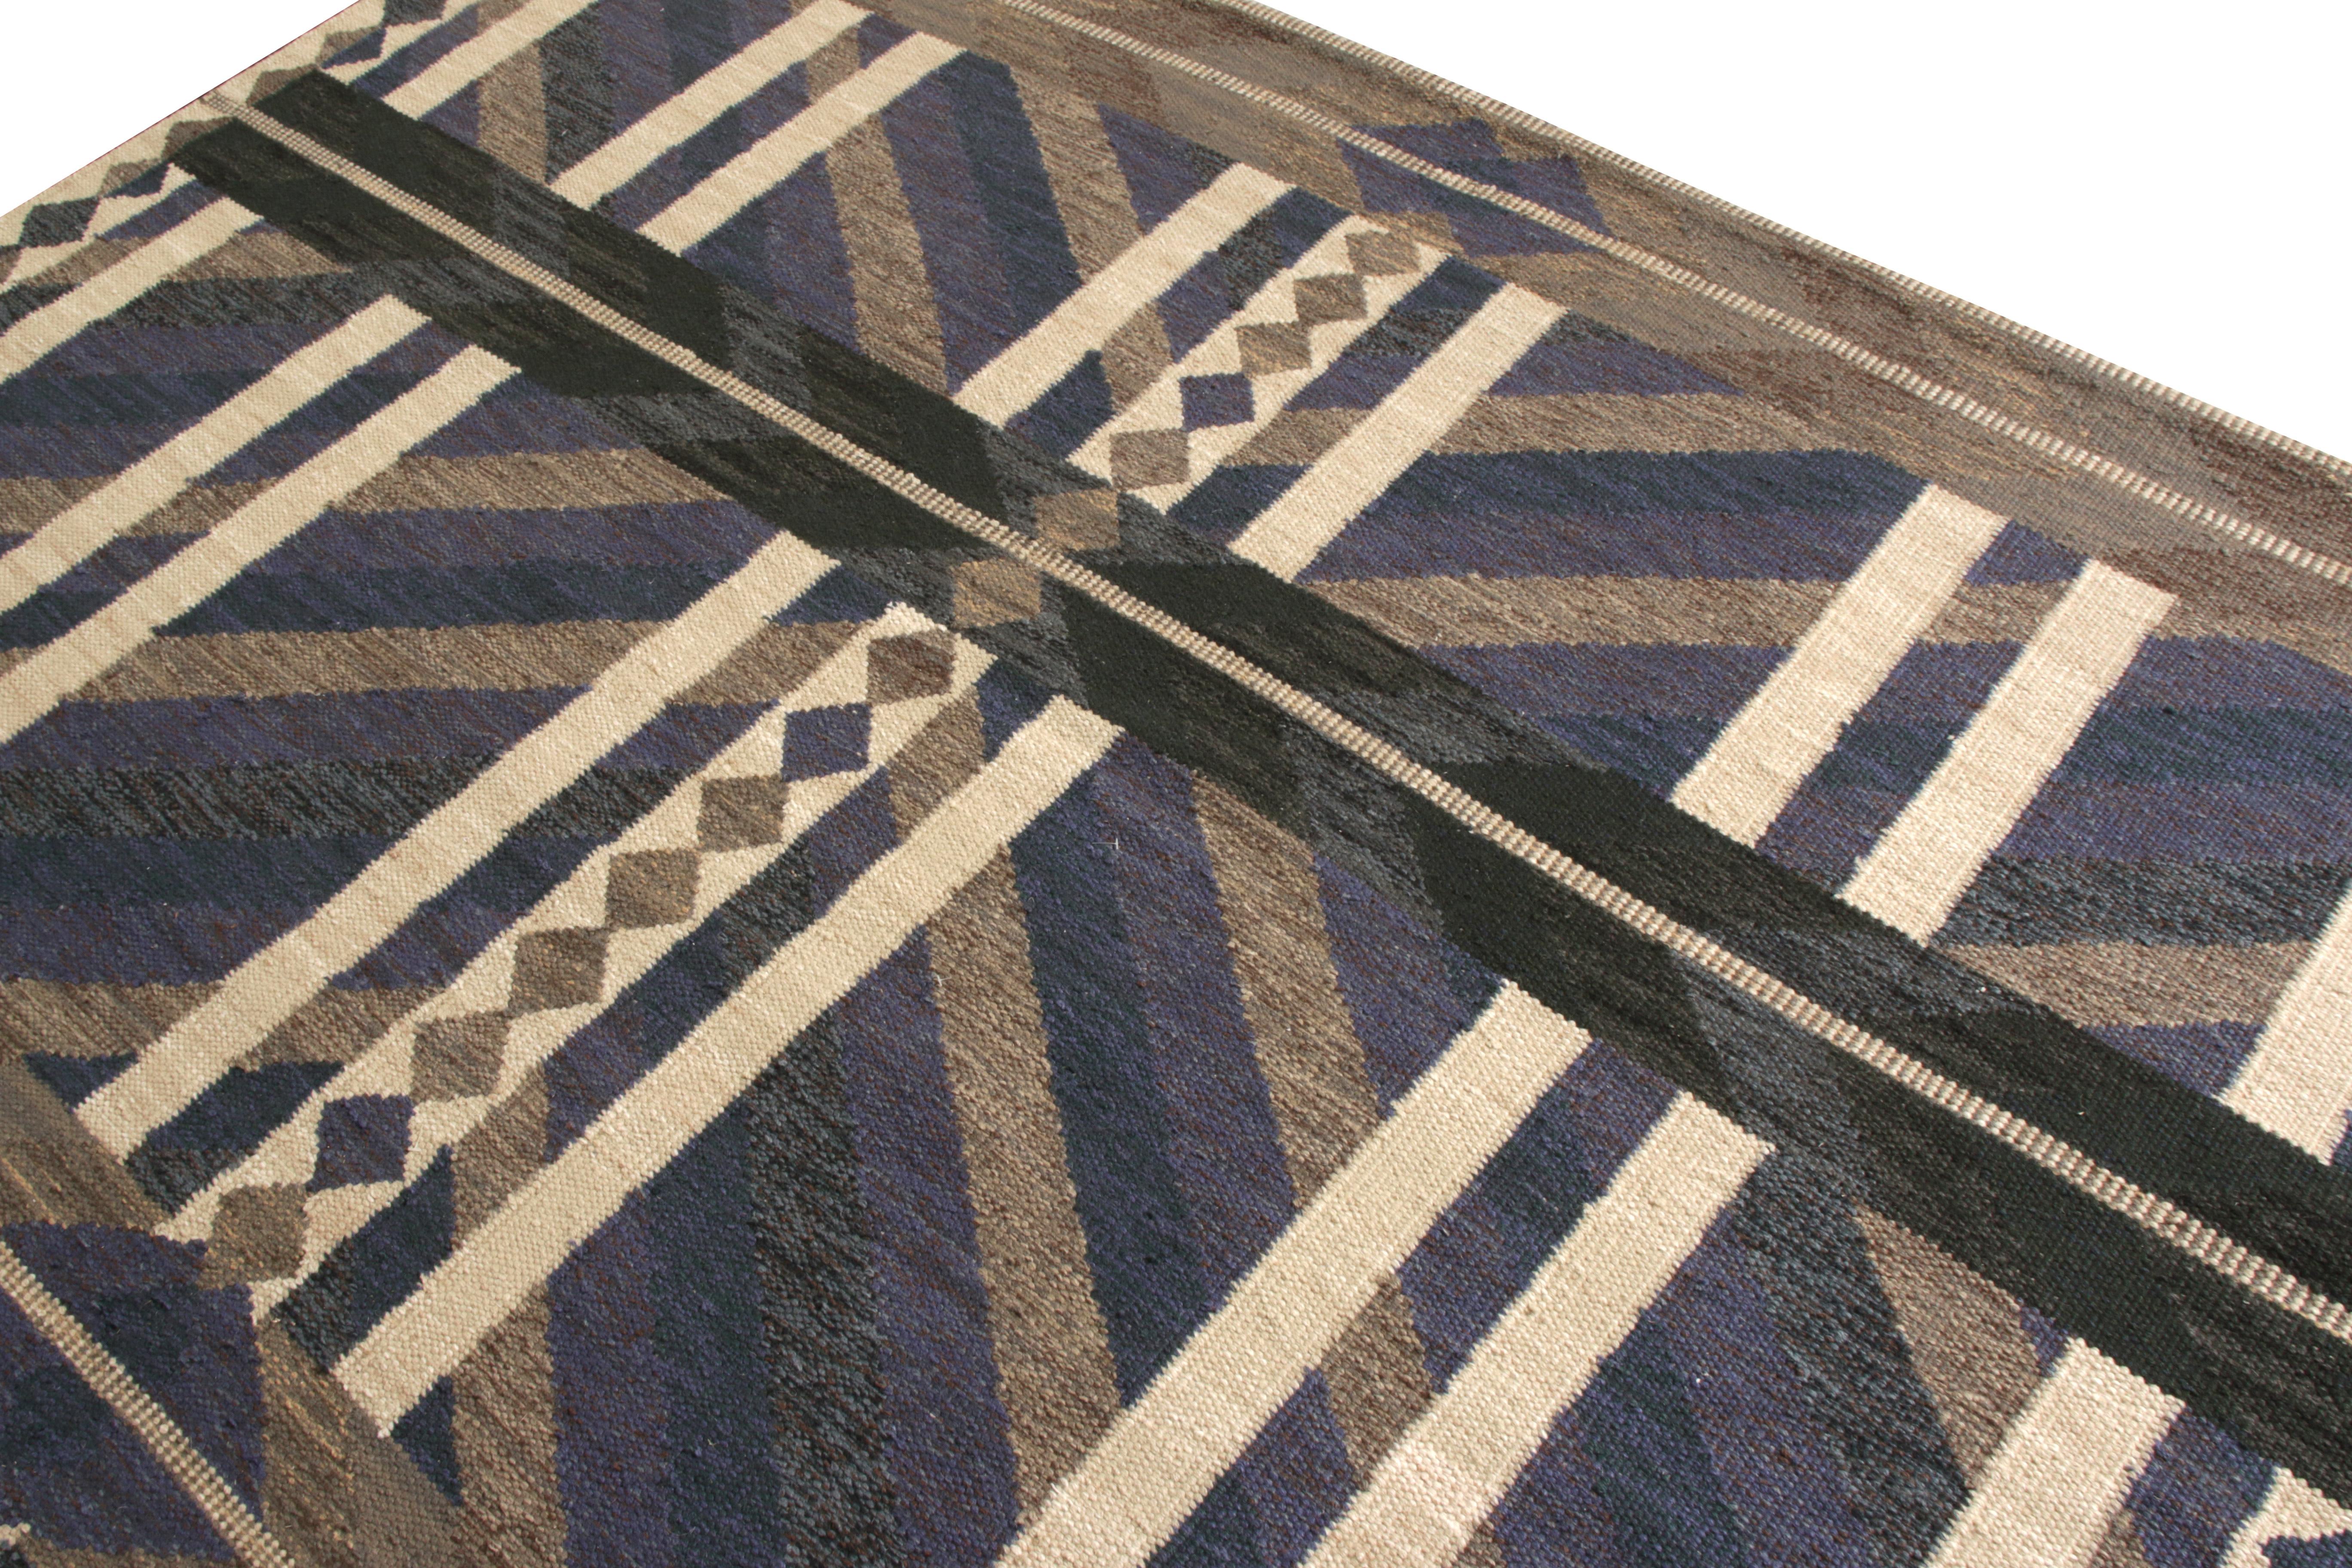 Rug & Kilim’s Scandinavian Style Kilim Rug in Blue Beige-Brown Geometric pattern In New Condition For Sale In Long Island City, NY